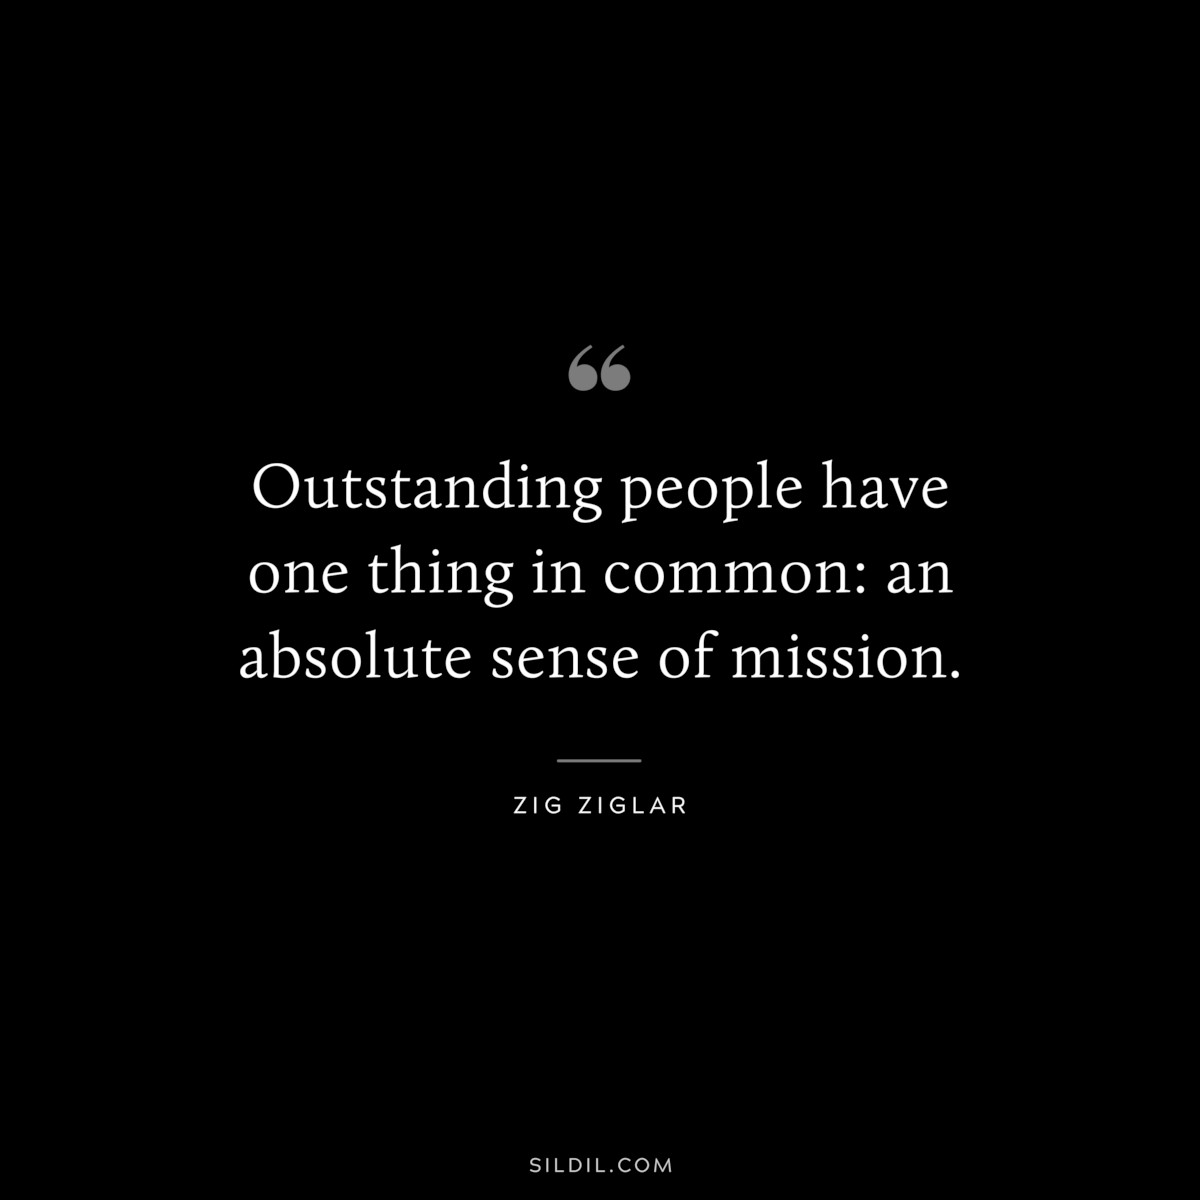 Outstanding people have one thing in common: an absolute sense of mission. ― Zig Ziglar